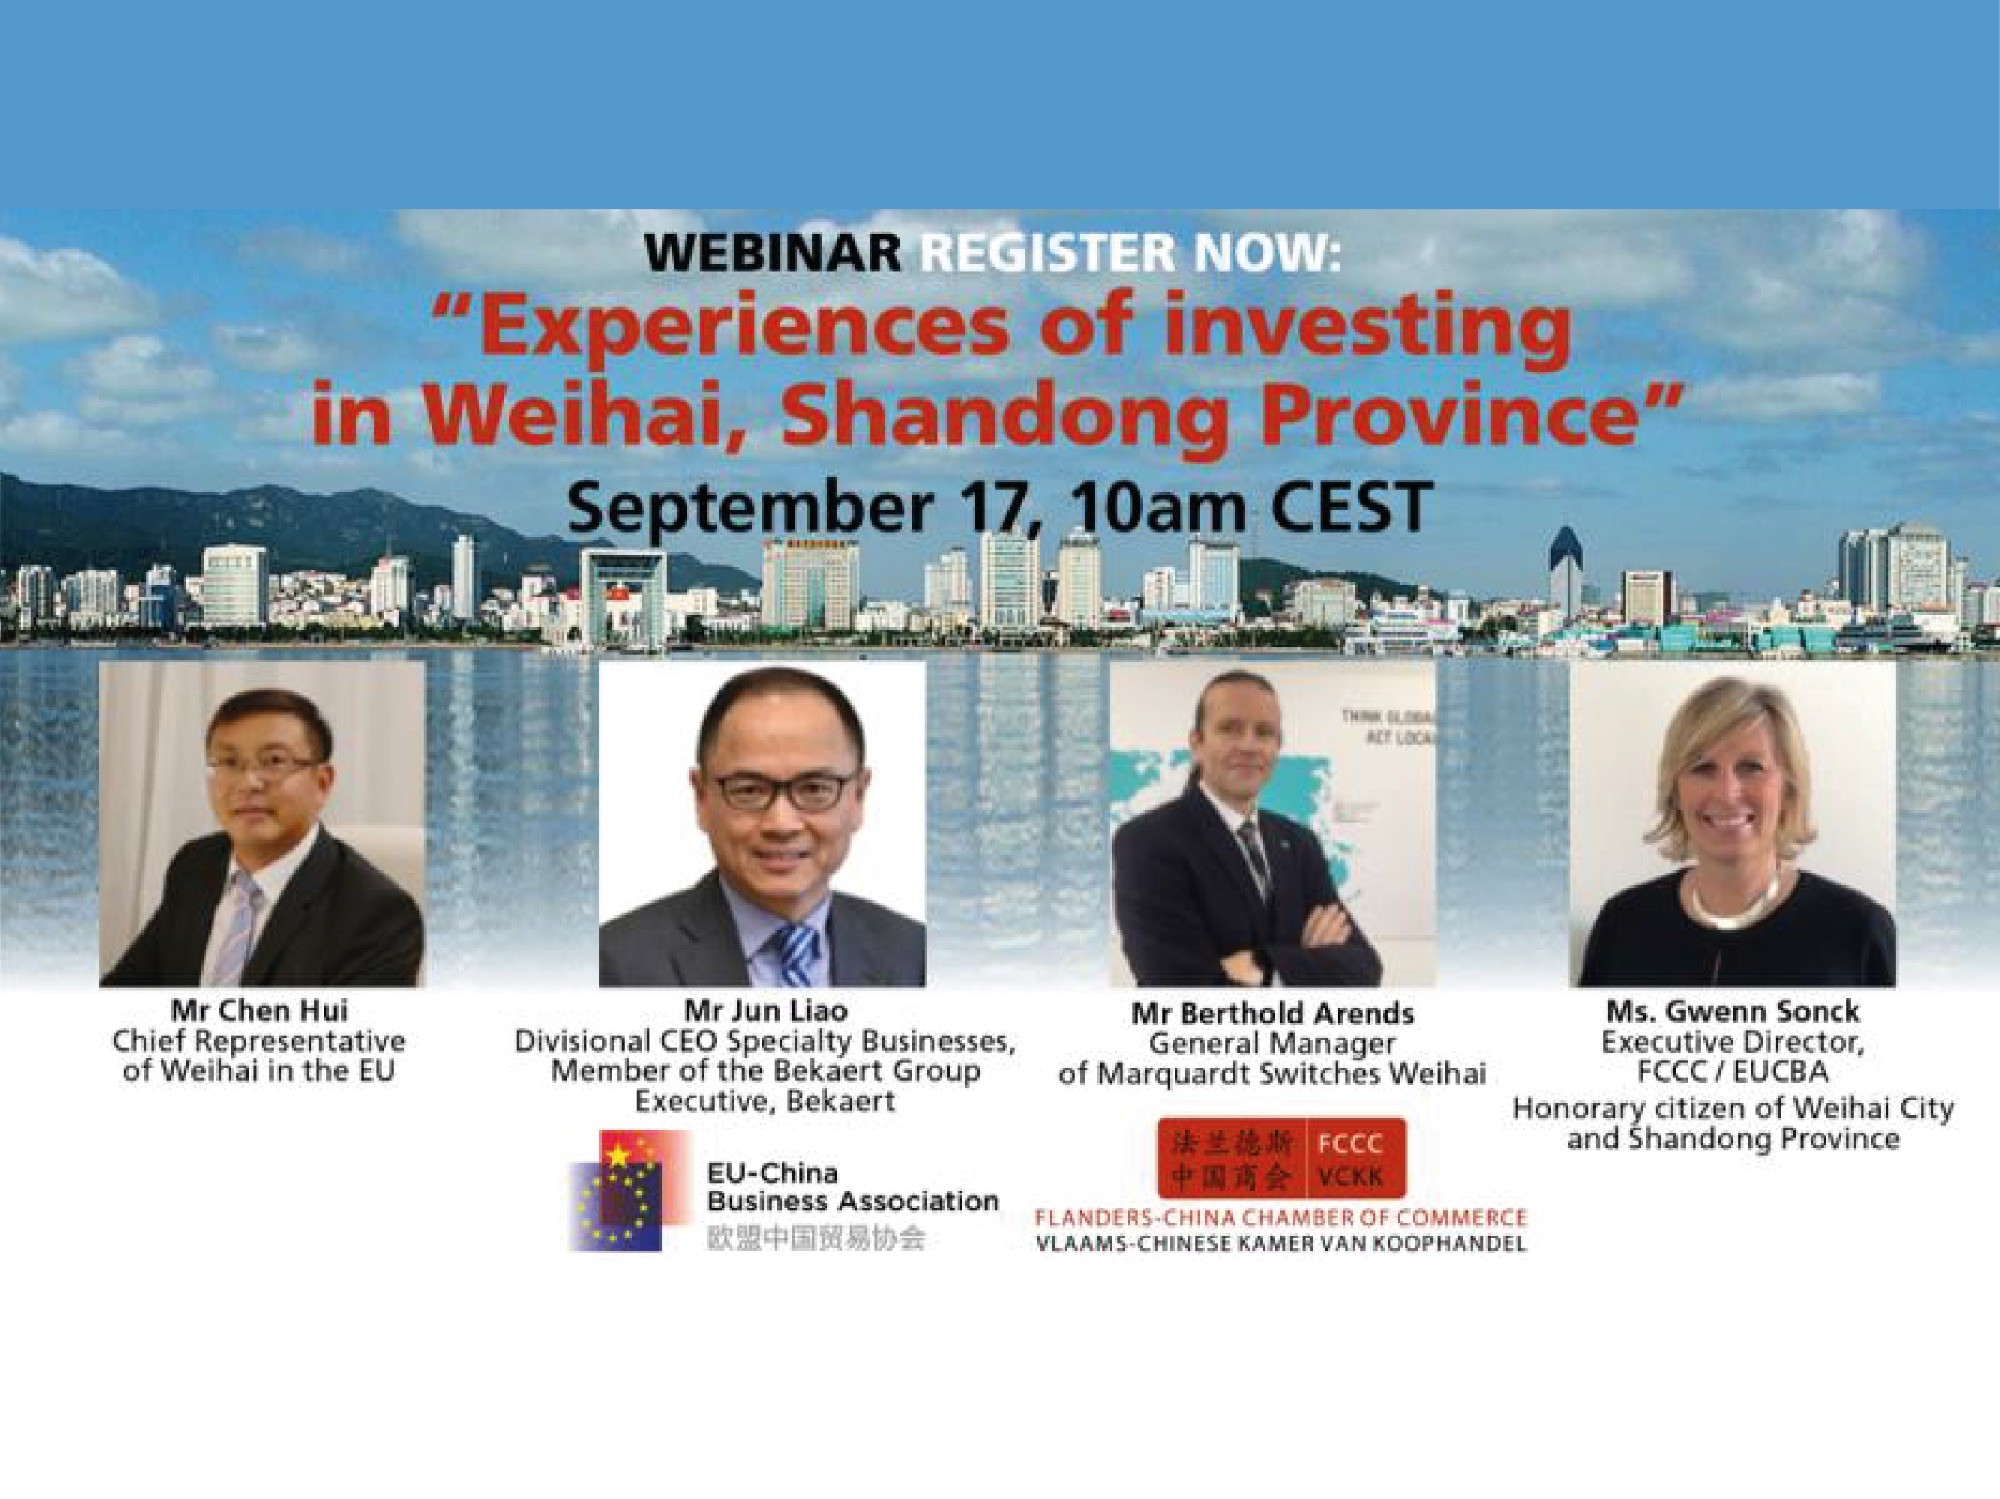 Webinar: Experiences of Investing in Weihai, Shandong Province